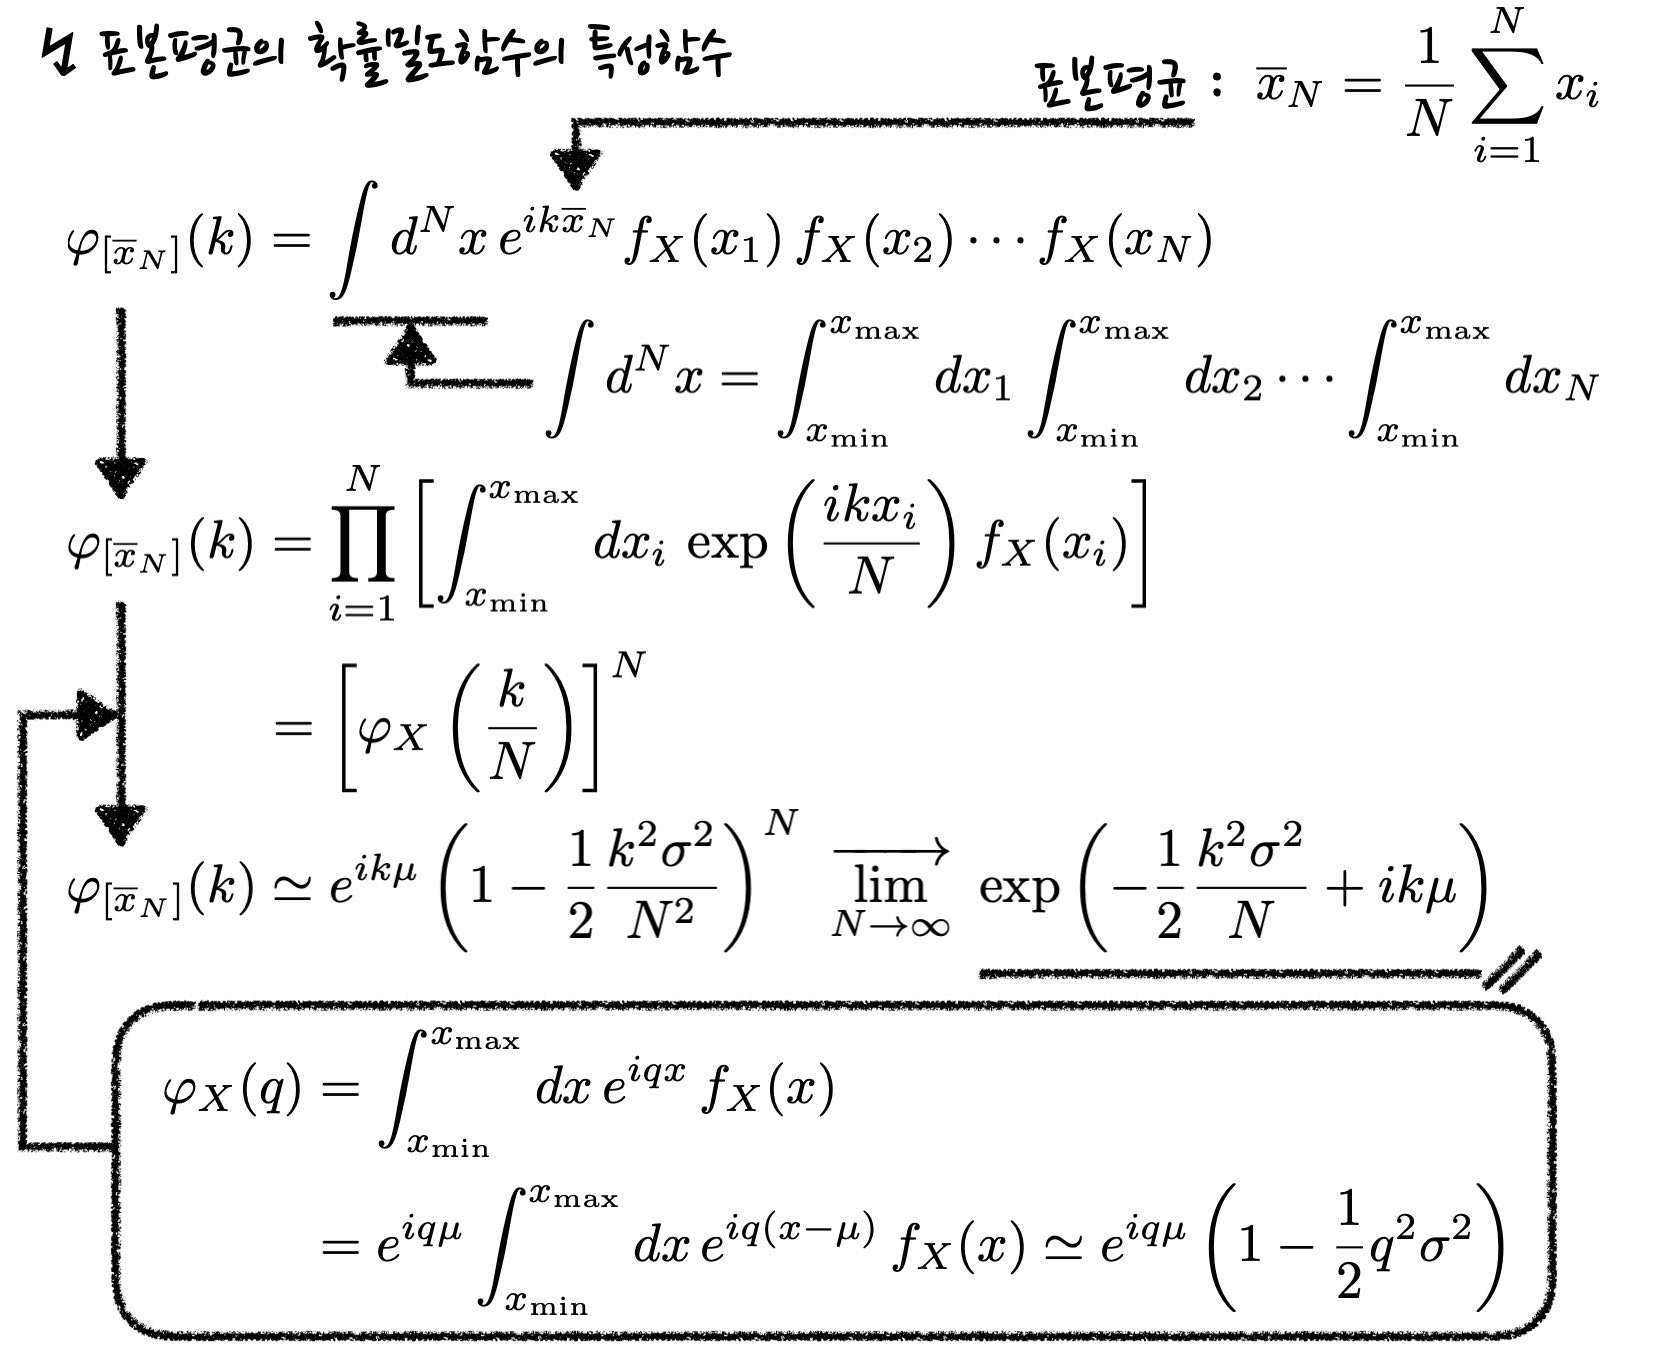 schematics of the central limit theorem, showing the characteristic function for the sample average in the limit of large number of samples